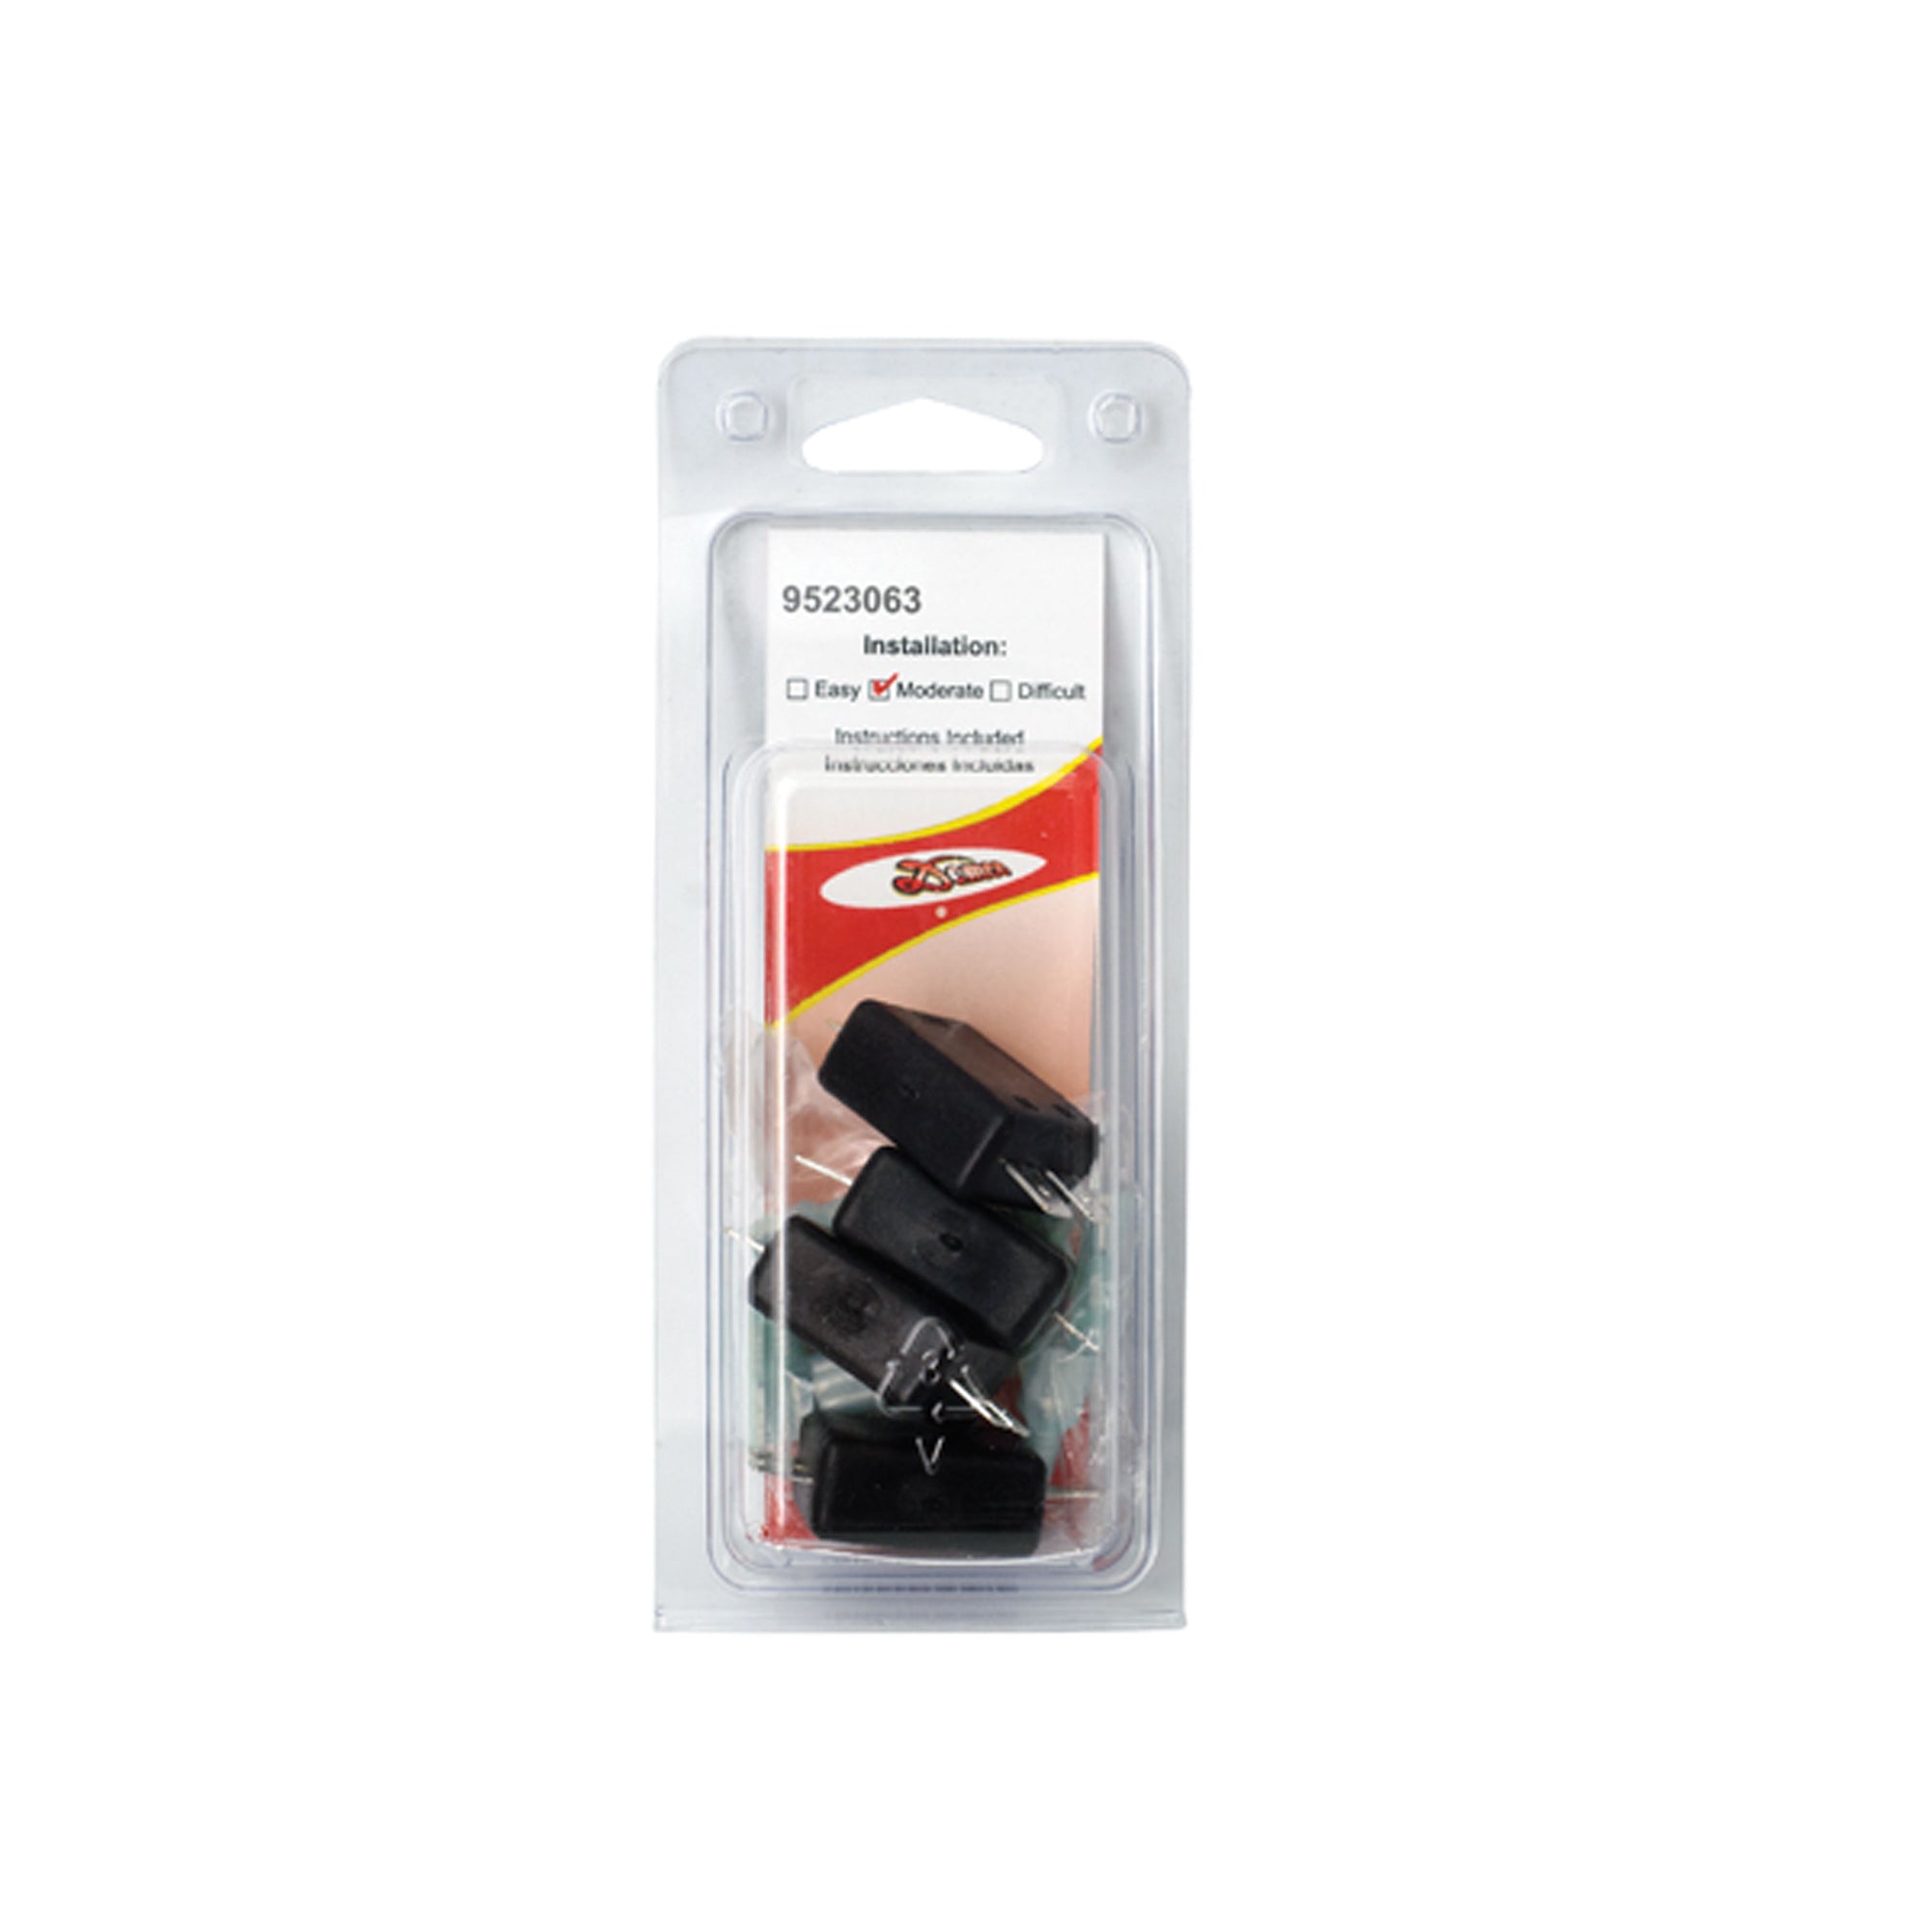 Demco 9523063 Heat-Sealed Diode Kit - 4 Pack